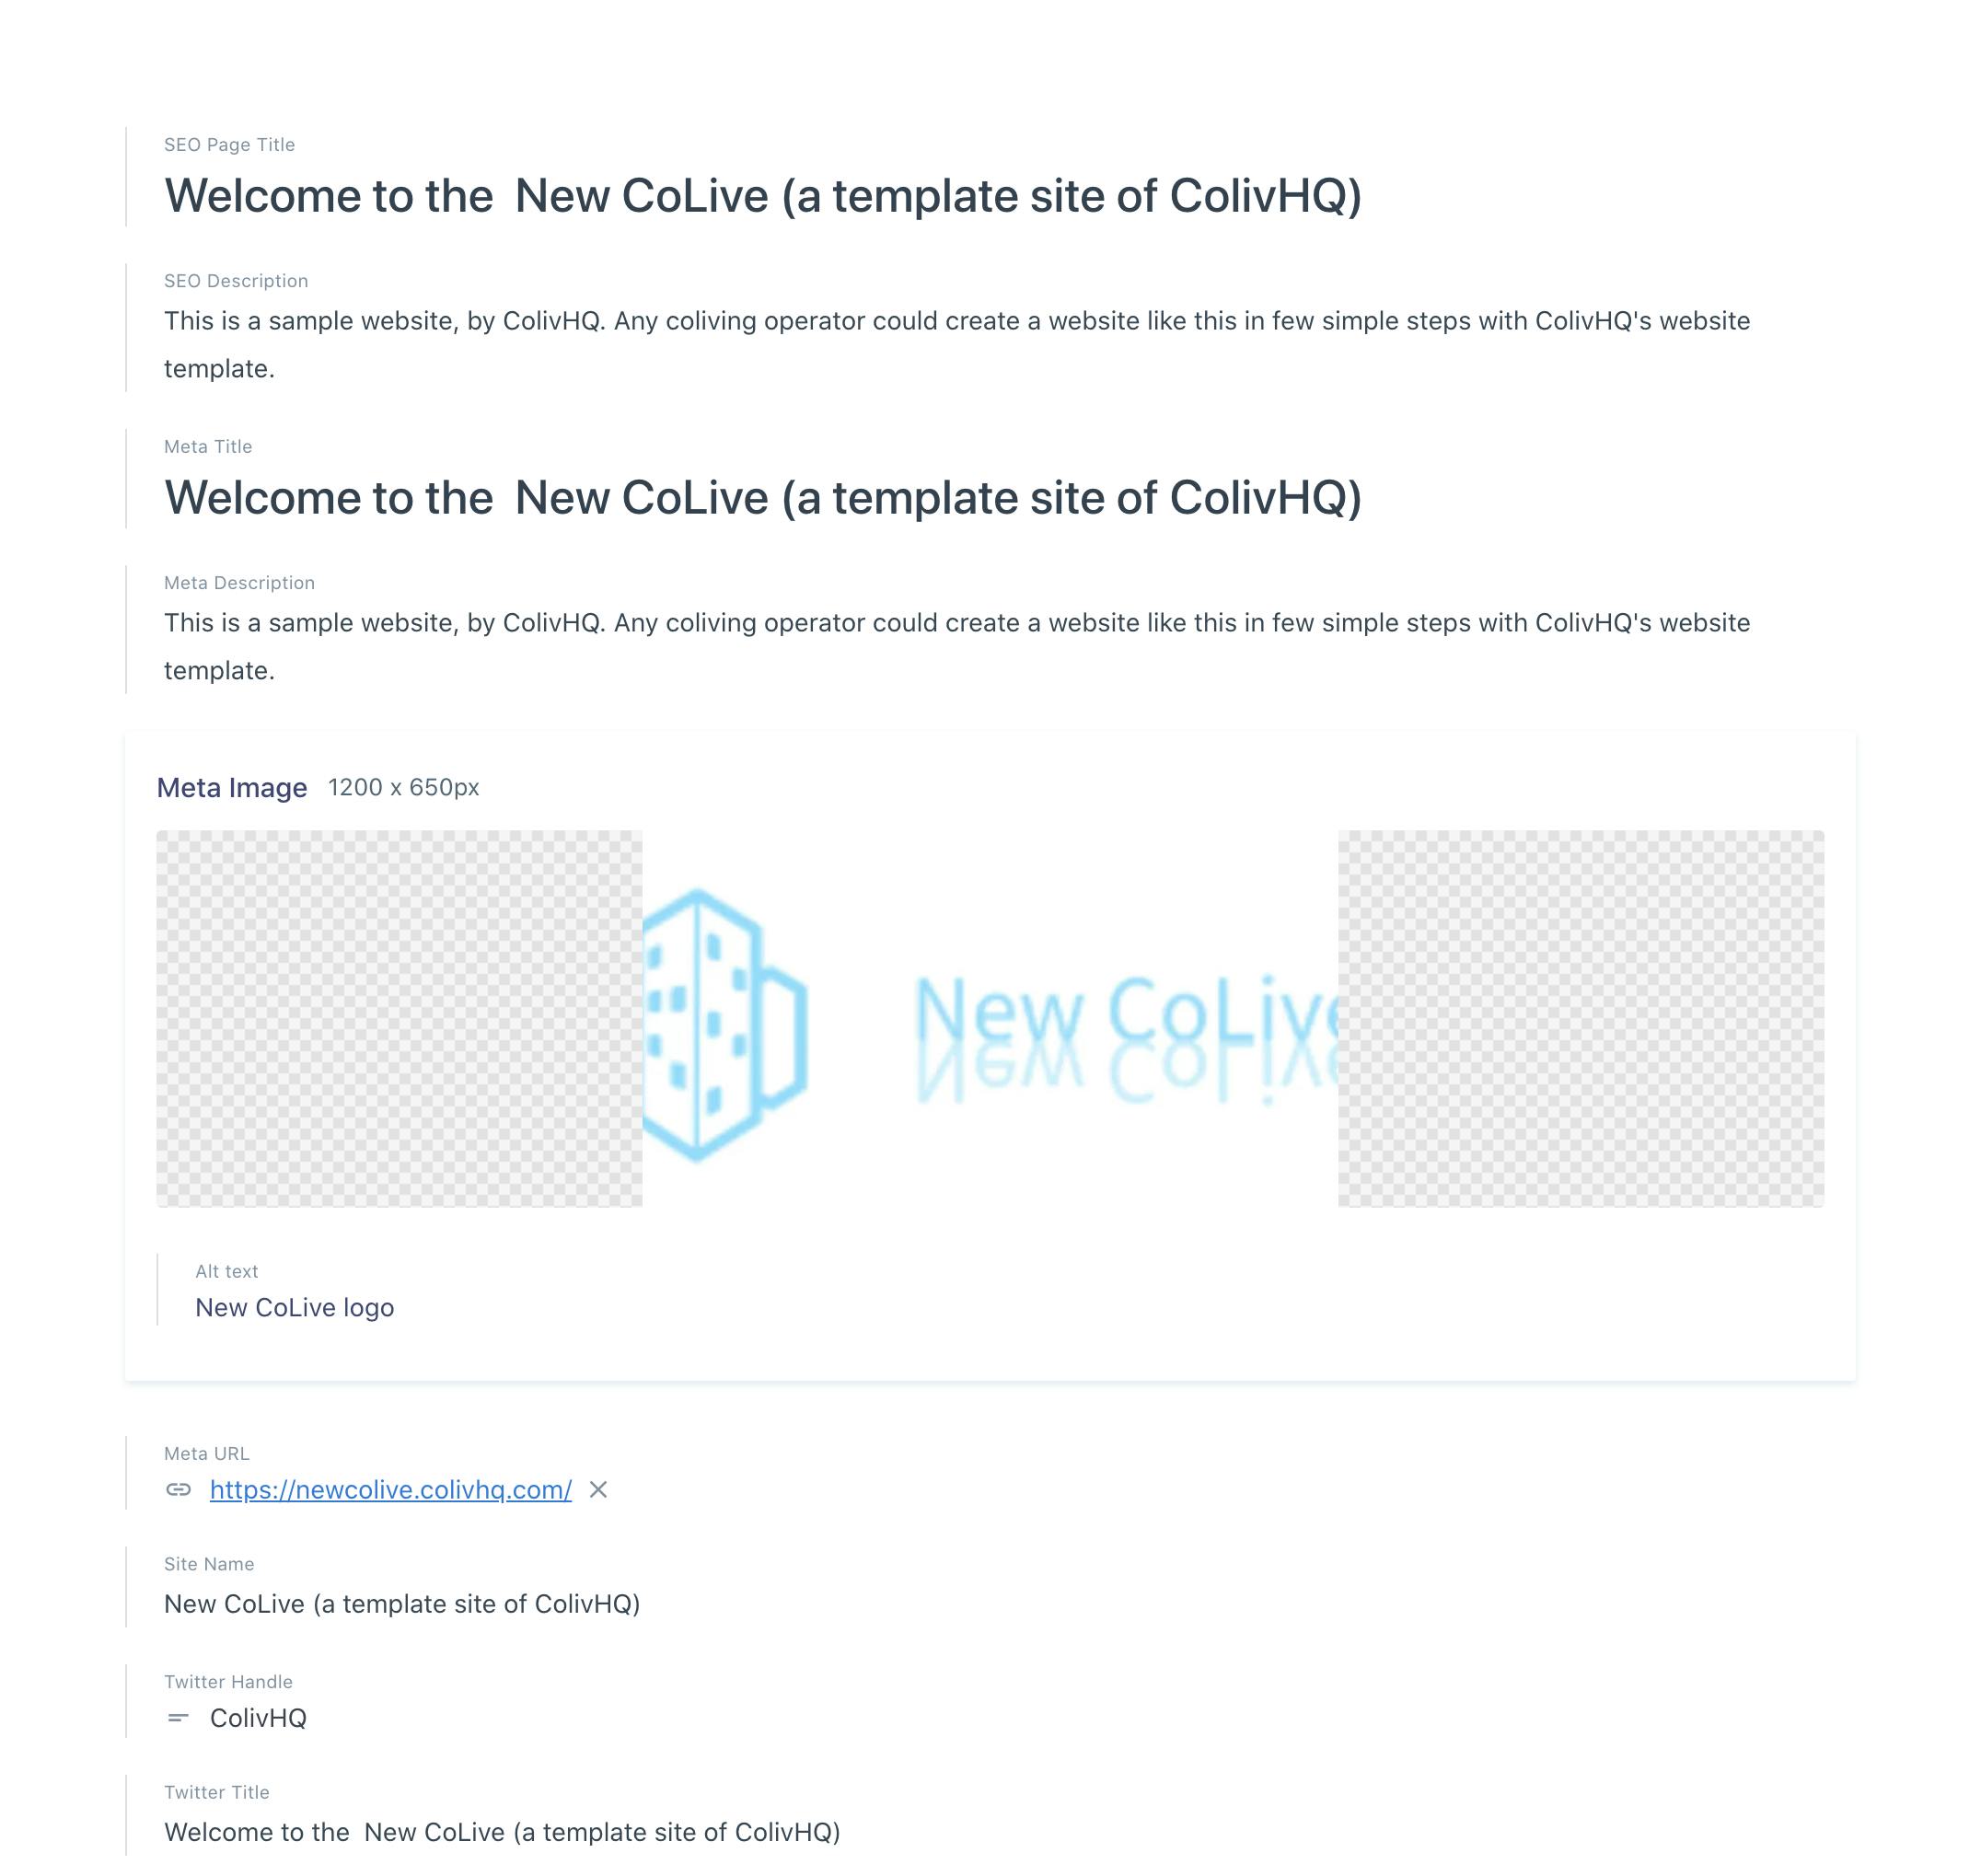 SEO details for the homepage of New CoLive in Prismic